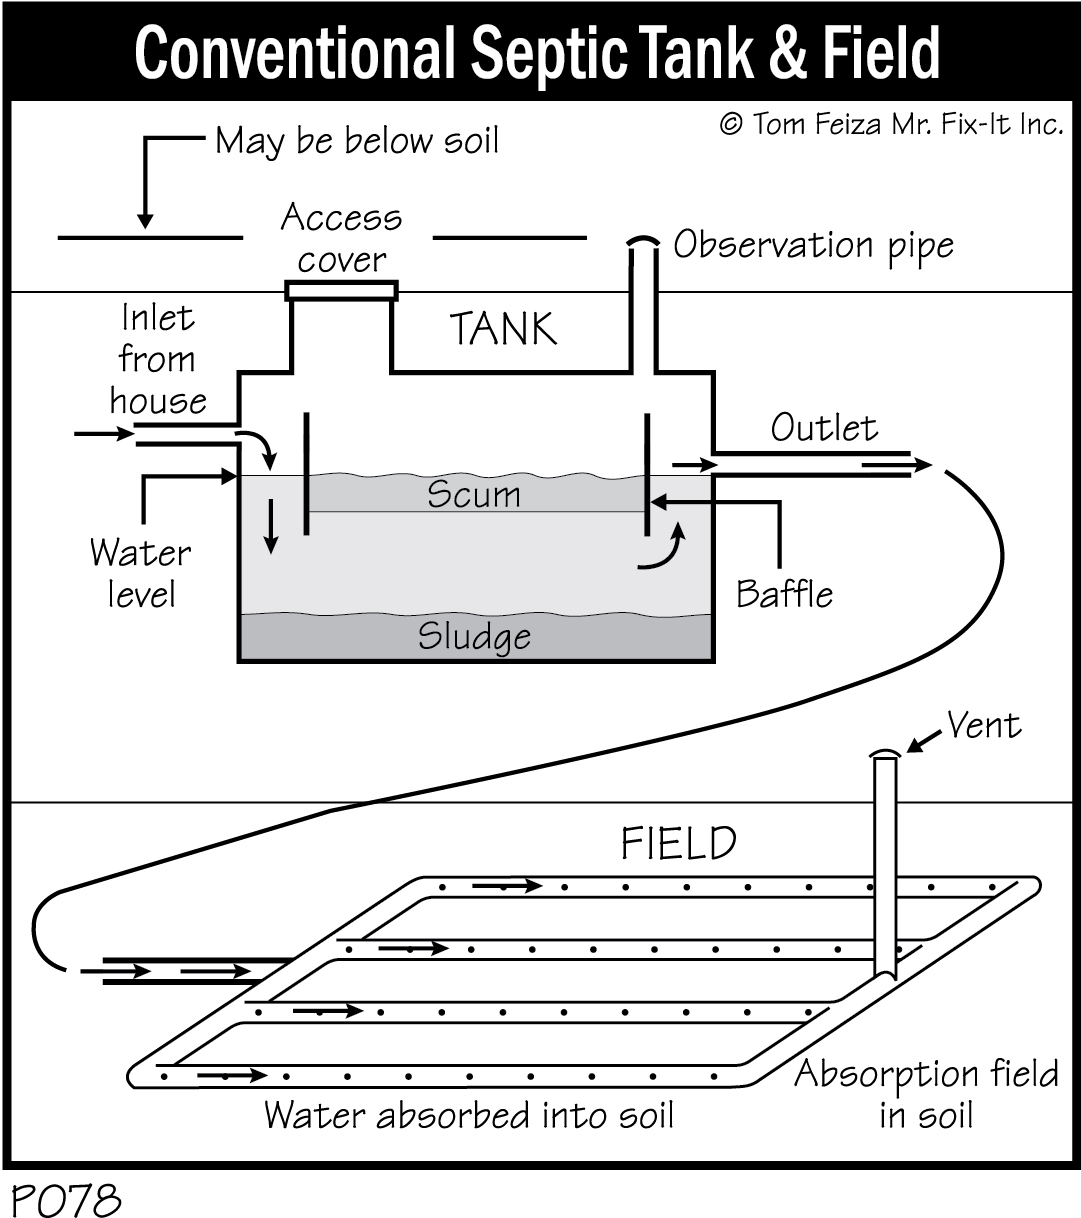 P078 - Conventional Septic Tank & Field